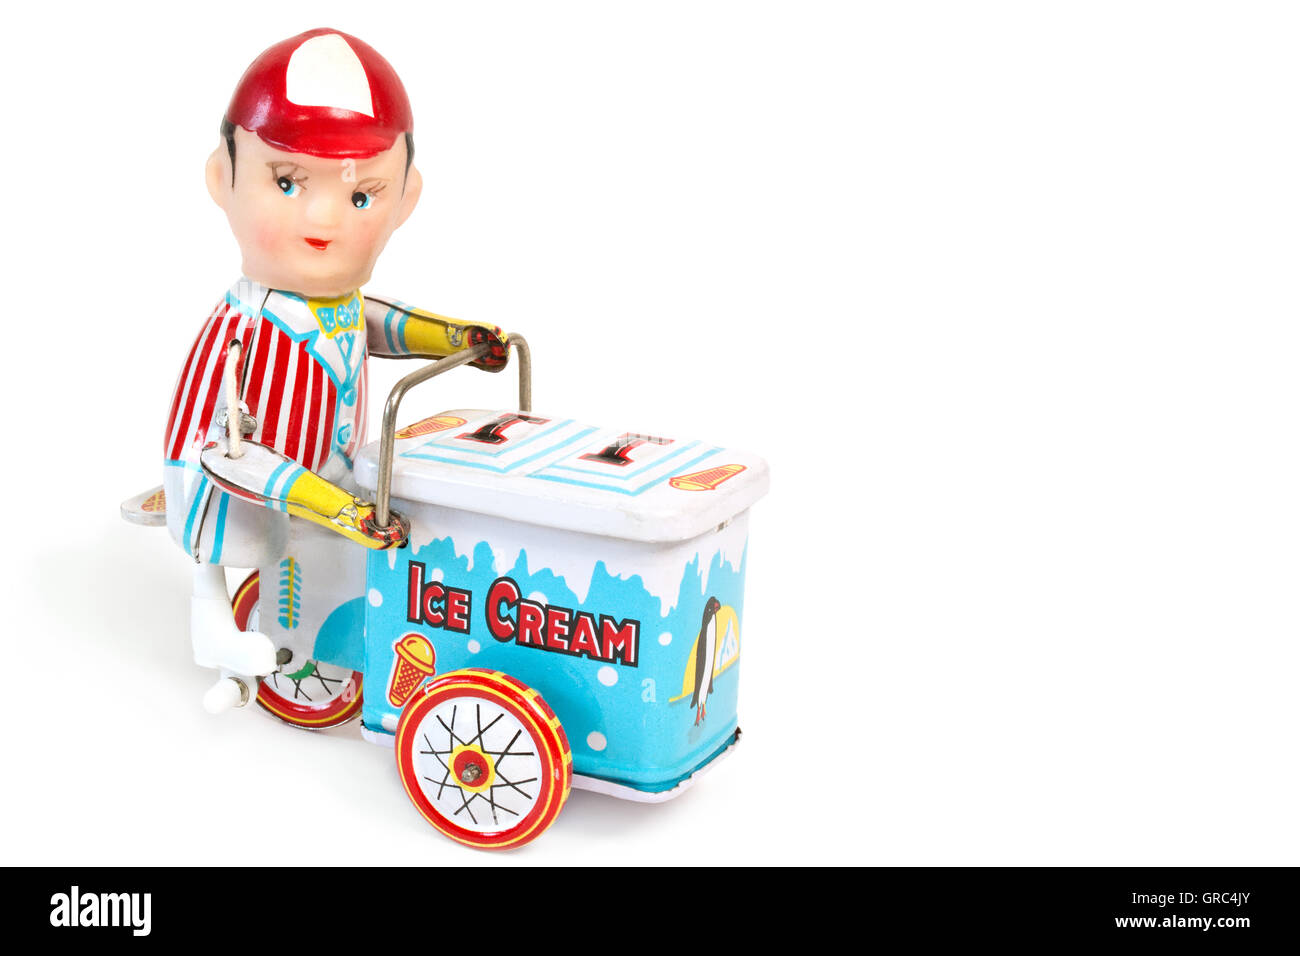 Toy Figurine With Ice Cart Over White Background Stock Photo